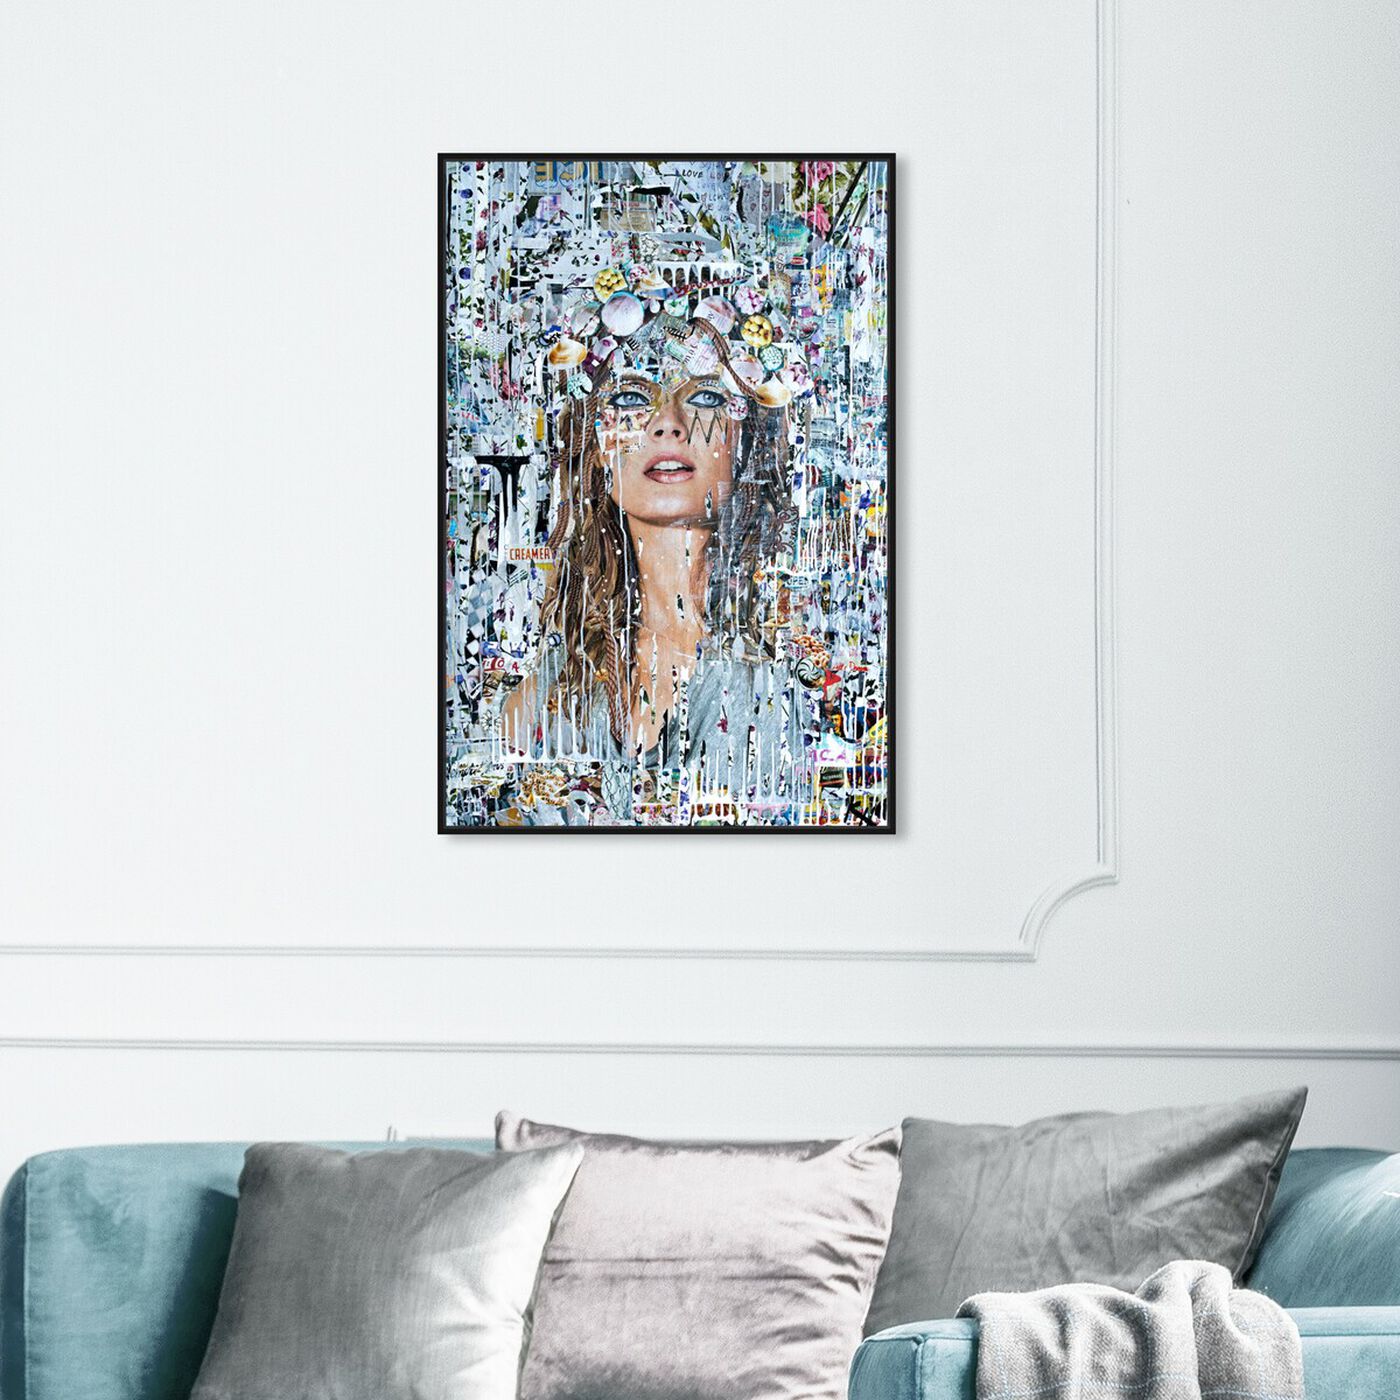 Hanging view of Katy Hirschfeld - Better Days featuring fashion and glam and portraits art.